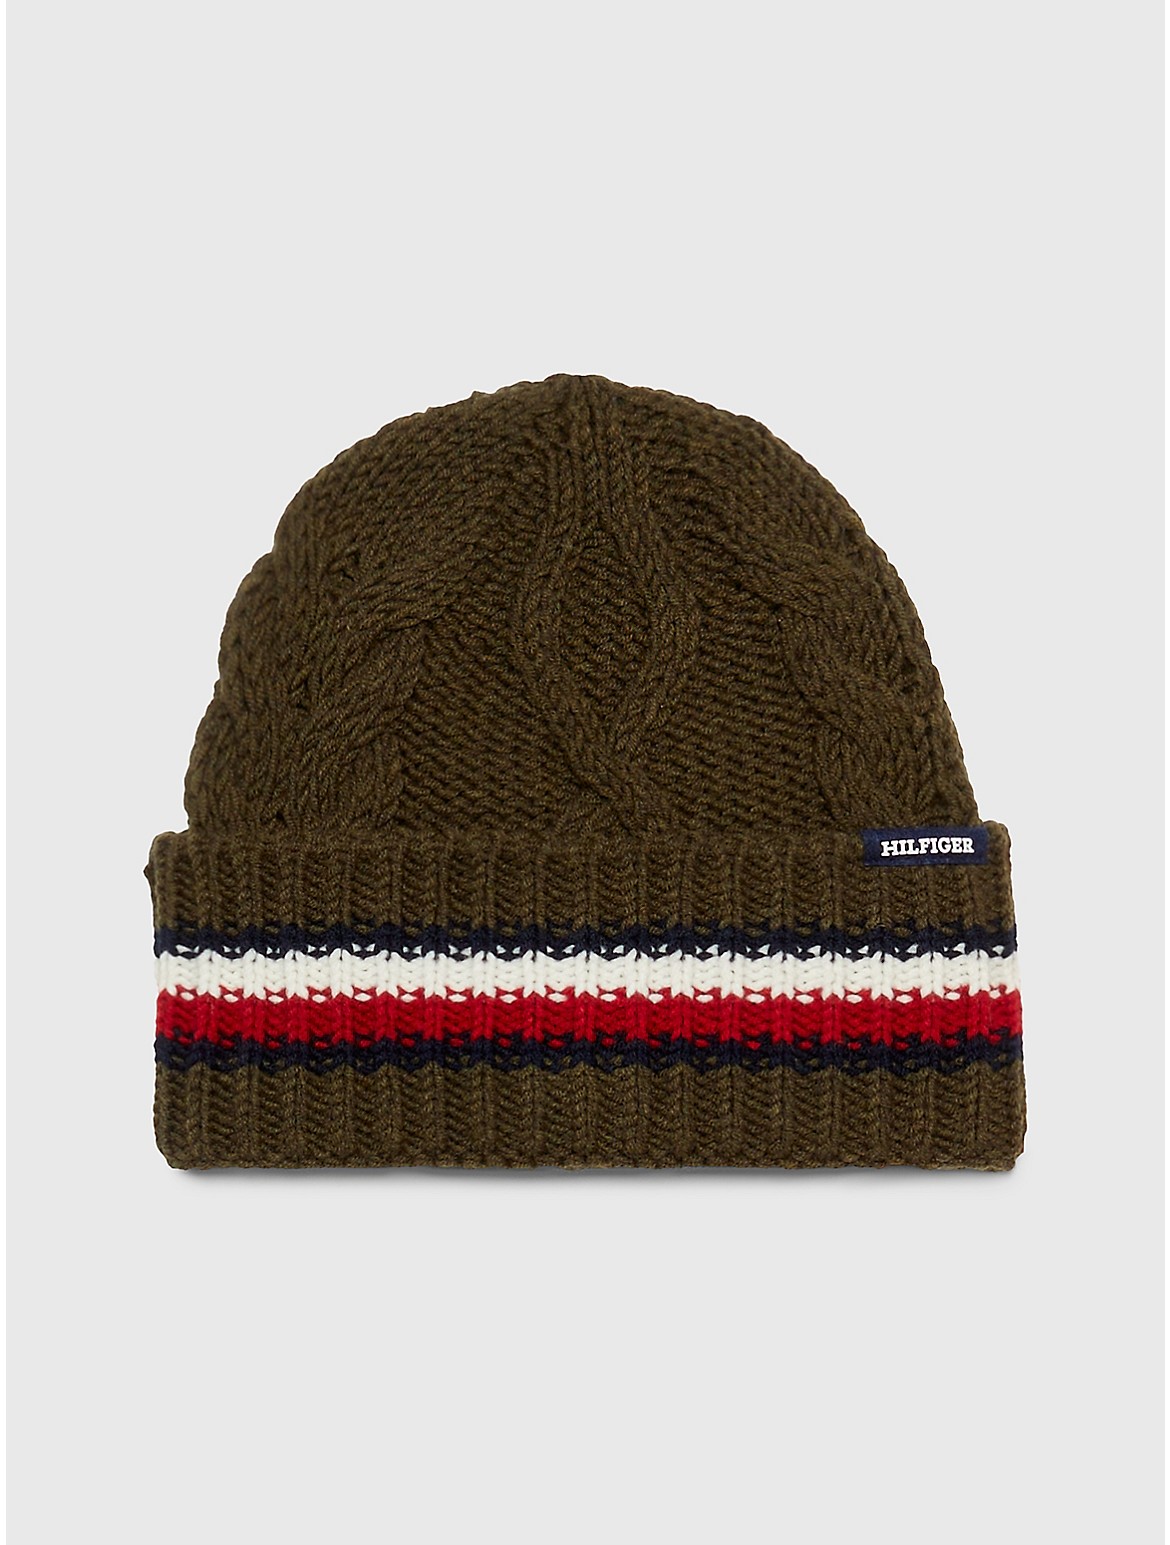 Tommy Hilfiger Men's Cable Knit Chunky Beanie - Green